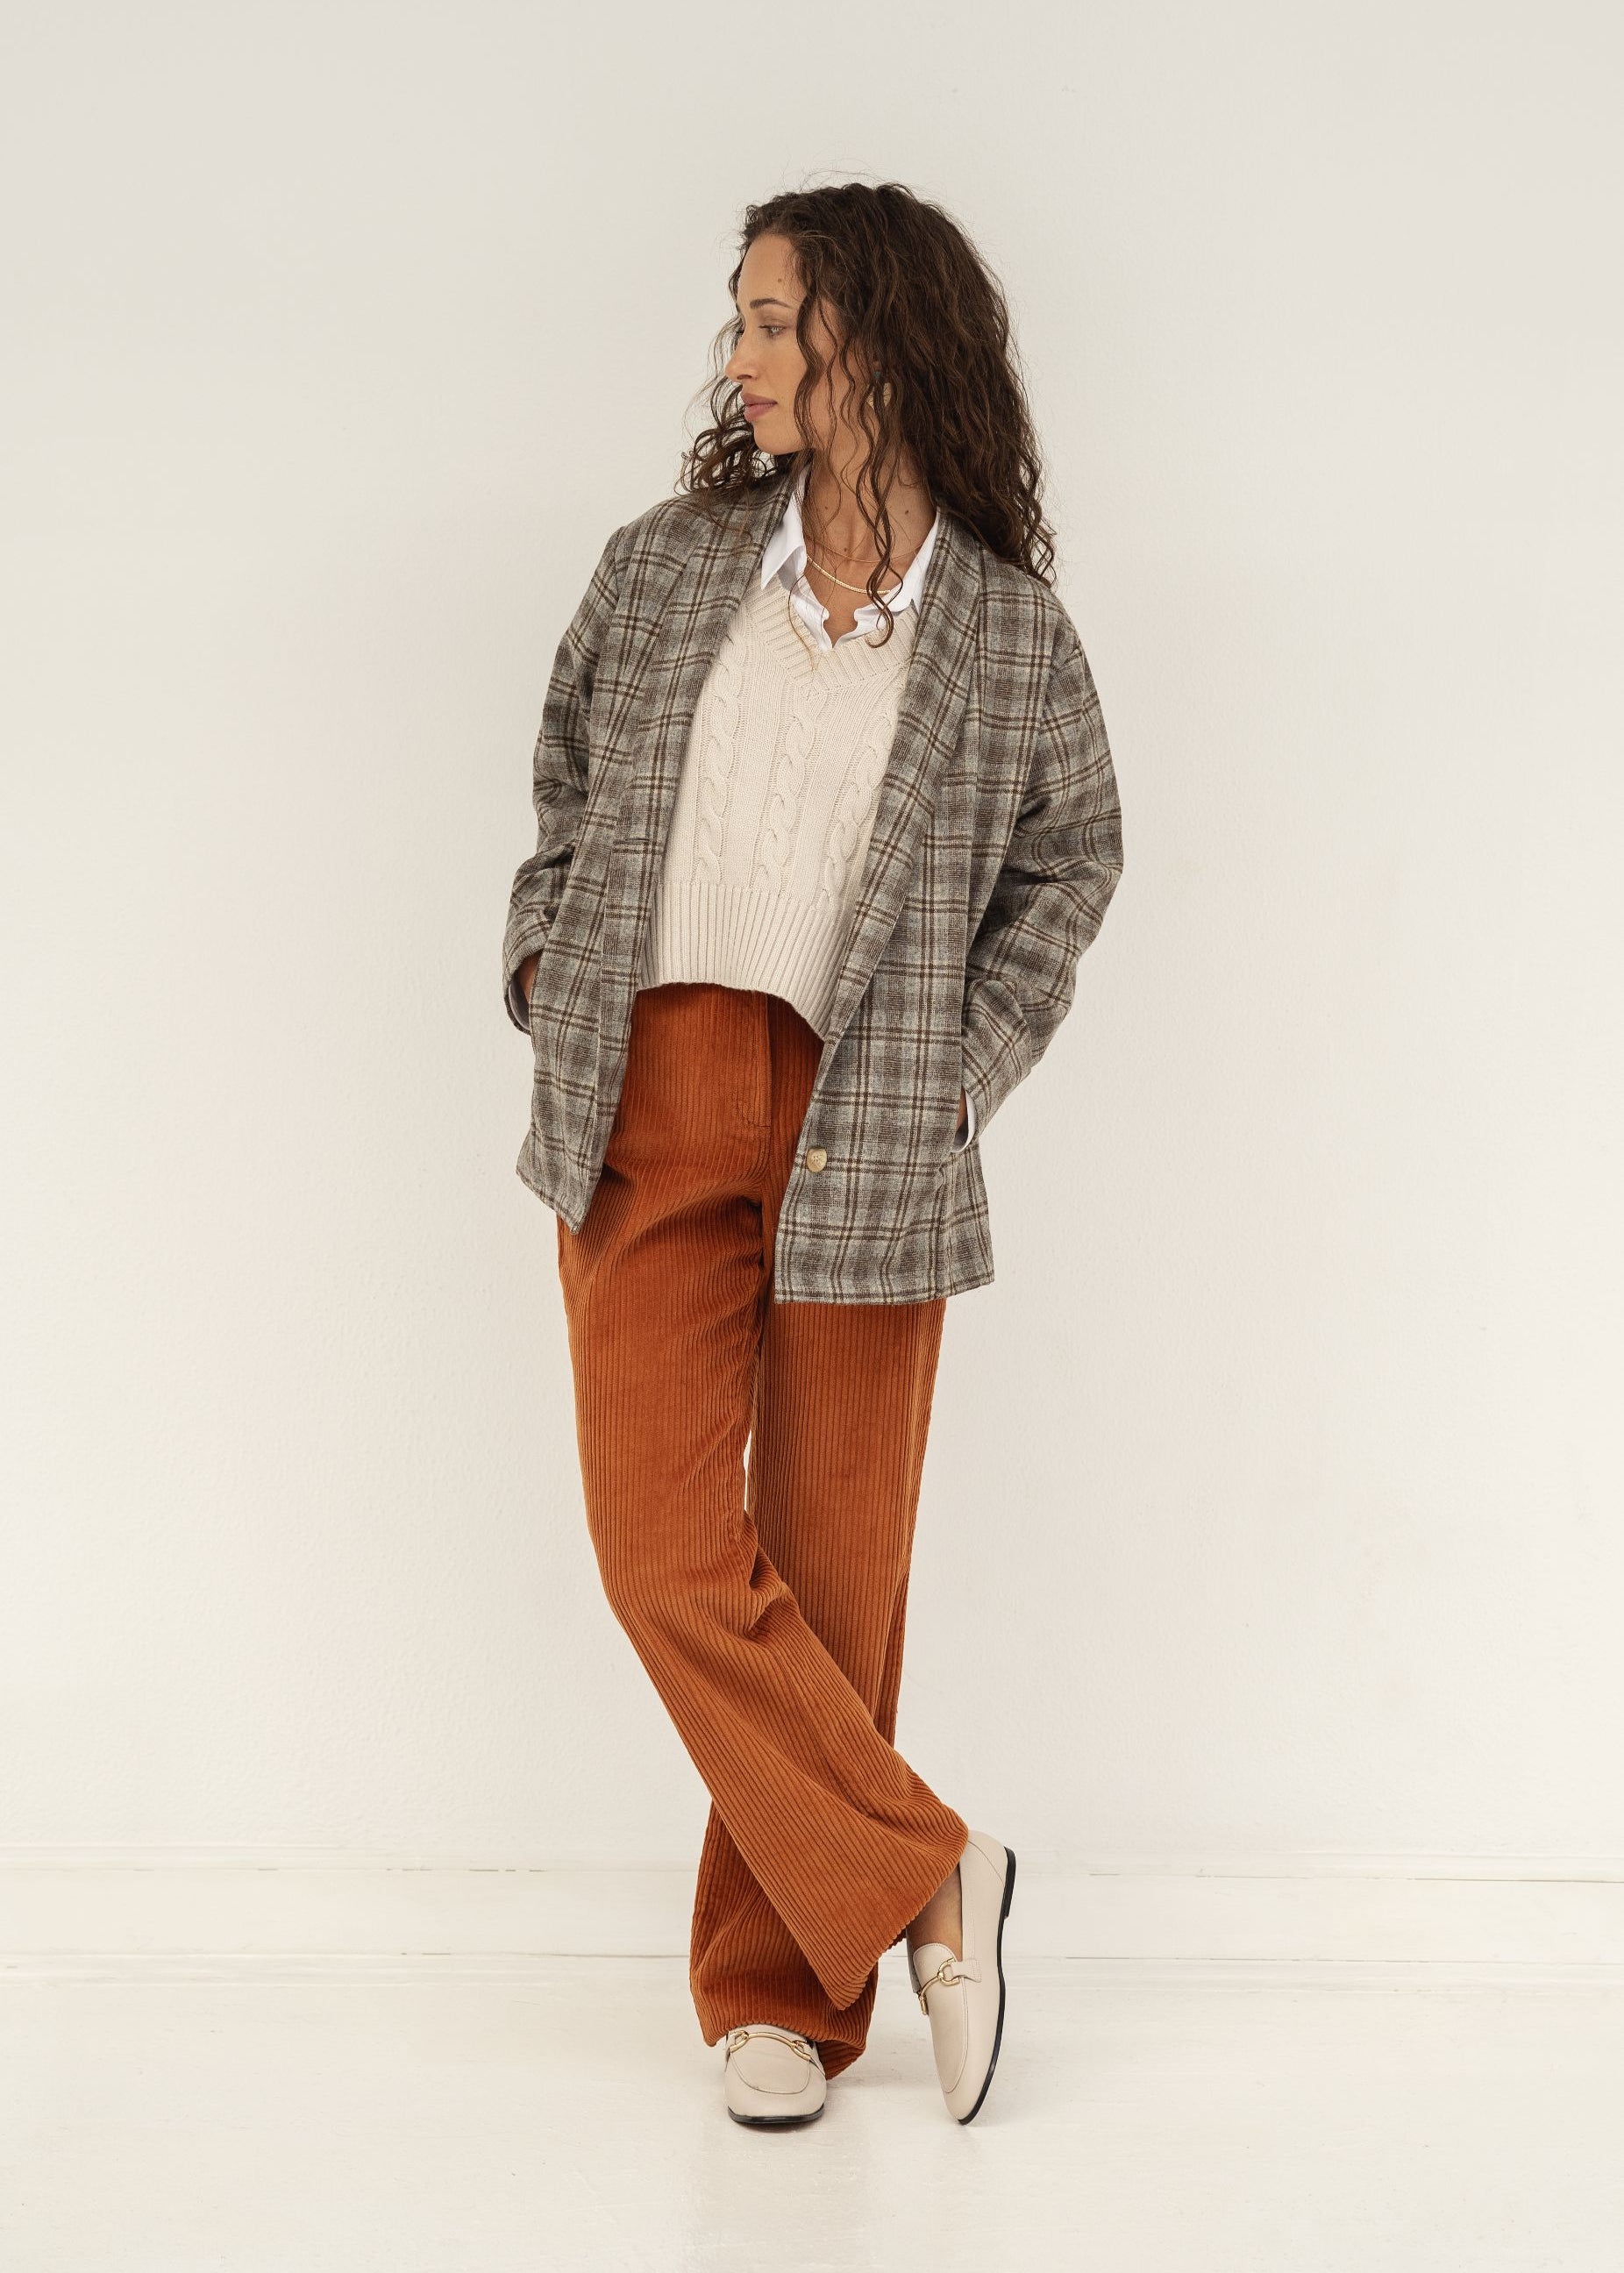 Naz women's sustainable winter 100% wool blazer. Made in Portugal with lasting quality. 